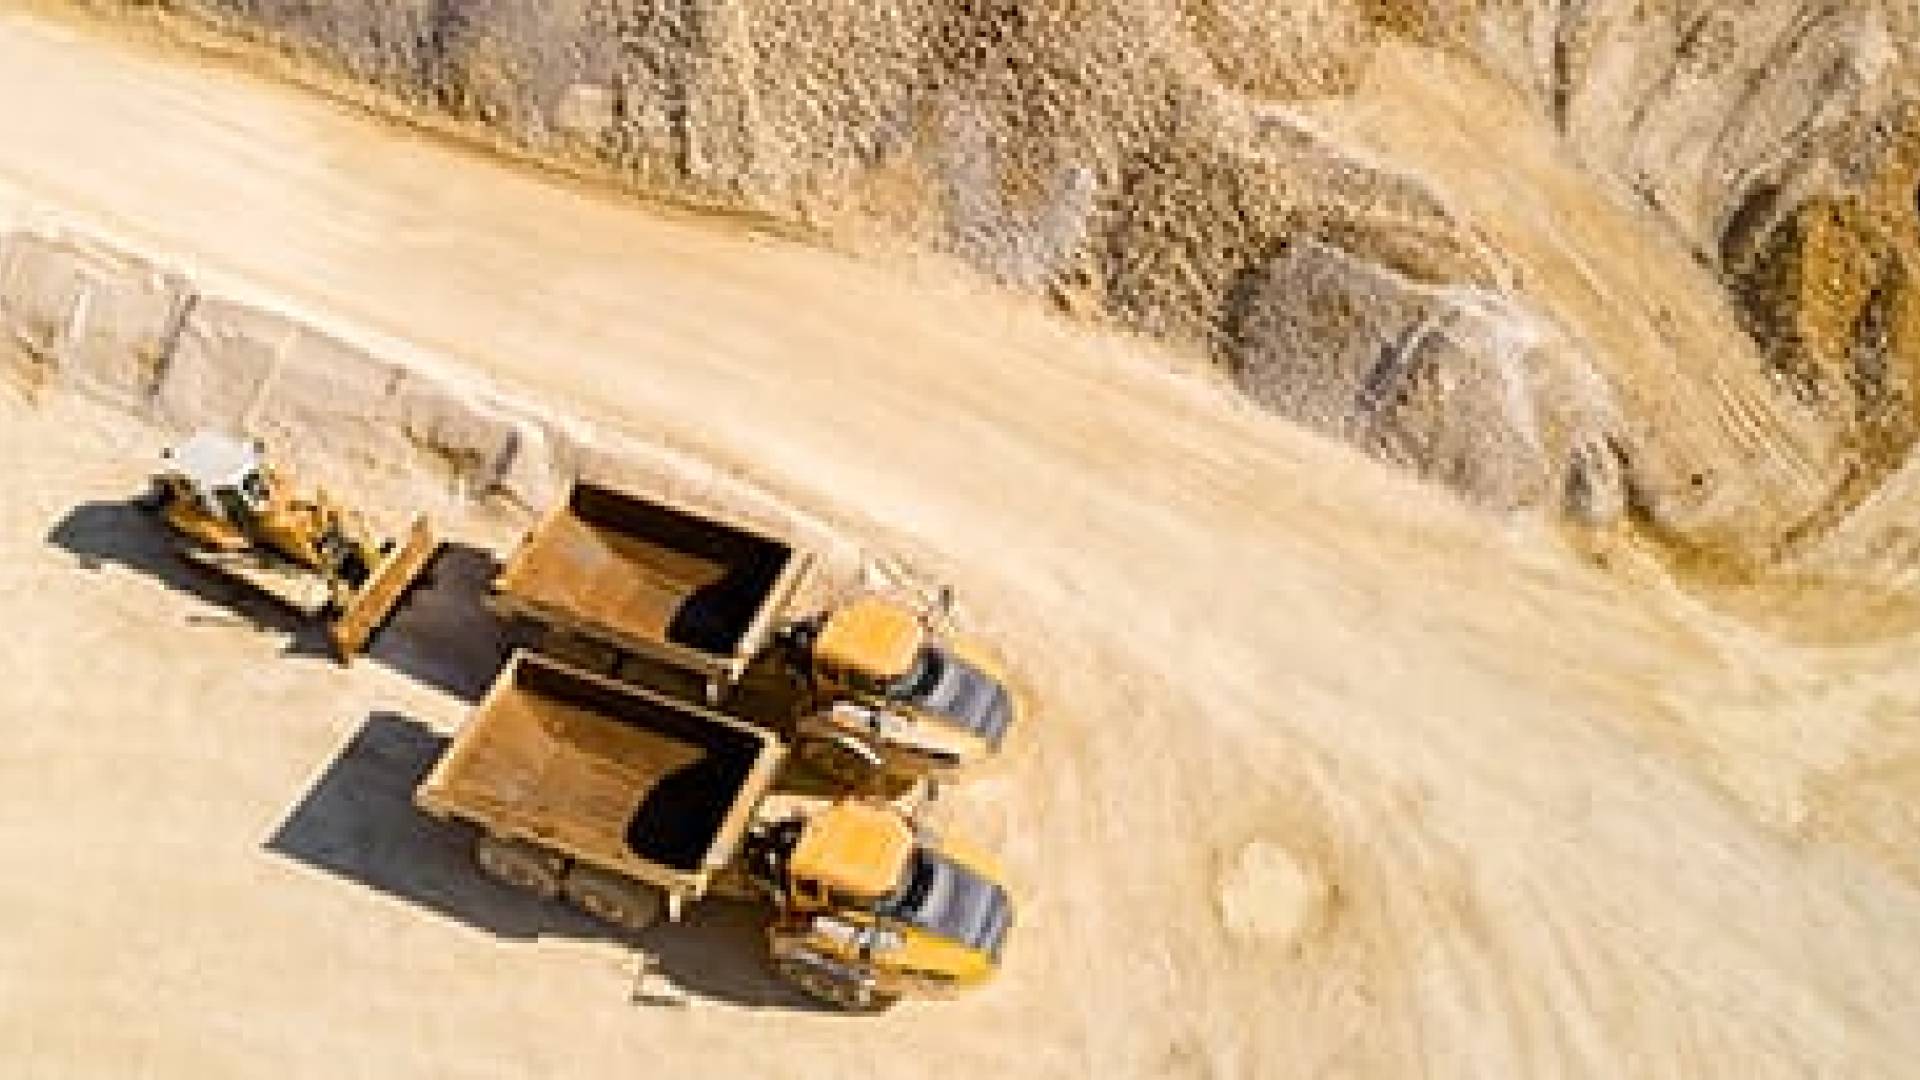 Aerial view of two dump trucks and a bulldozer in a quarry.